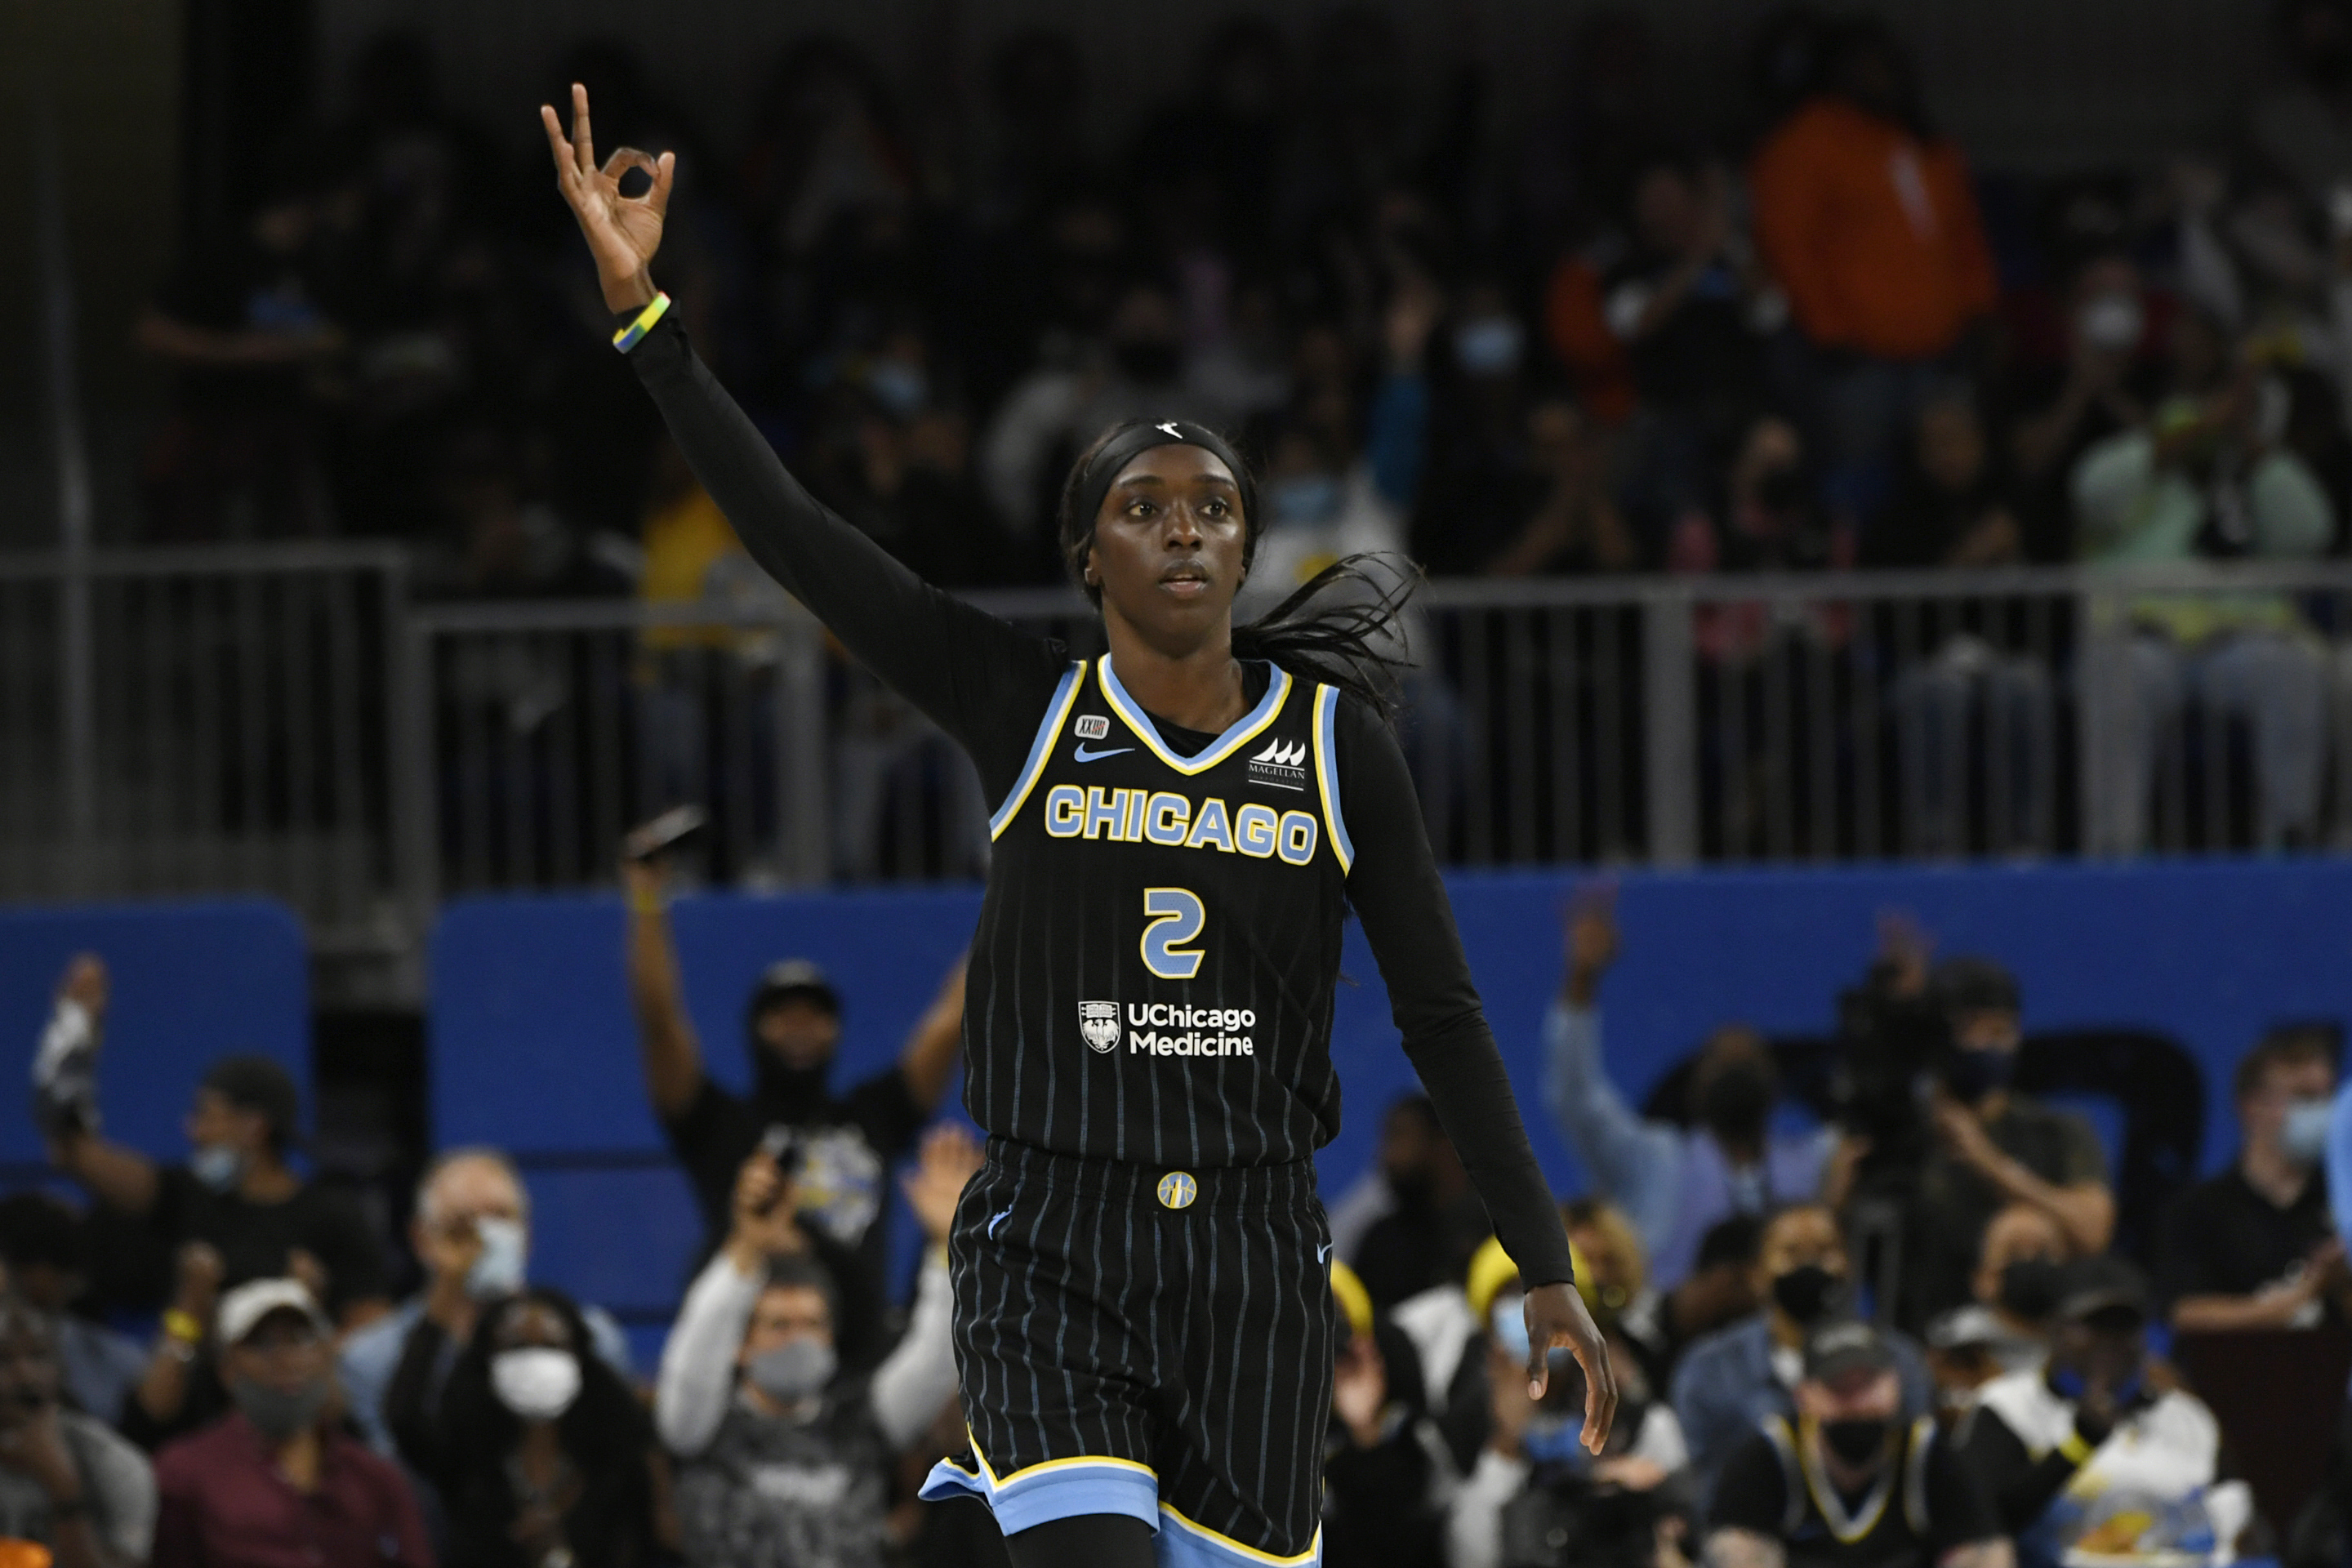 Rutgers great Kahleah Copper wins WNBA title and Finals MVP - On